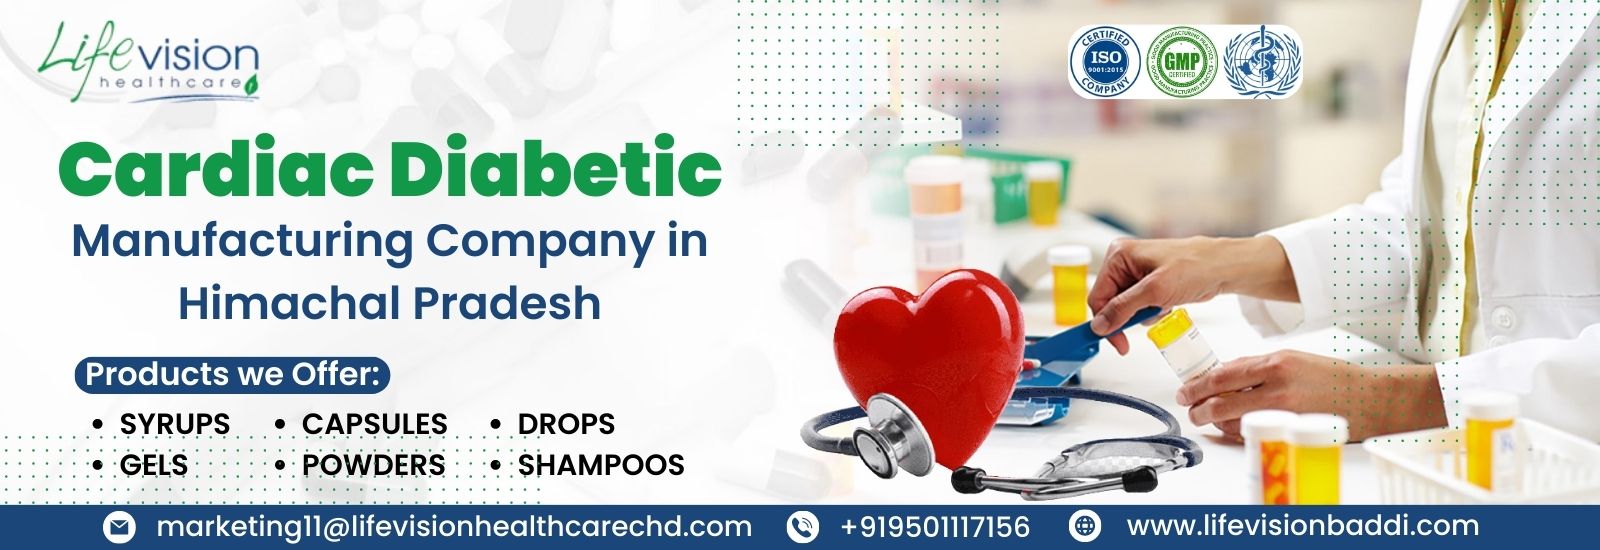 Cardiac Diabetic Products Manufacturing Company in Himachal Pradesh